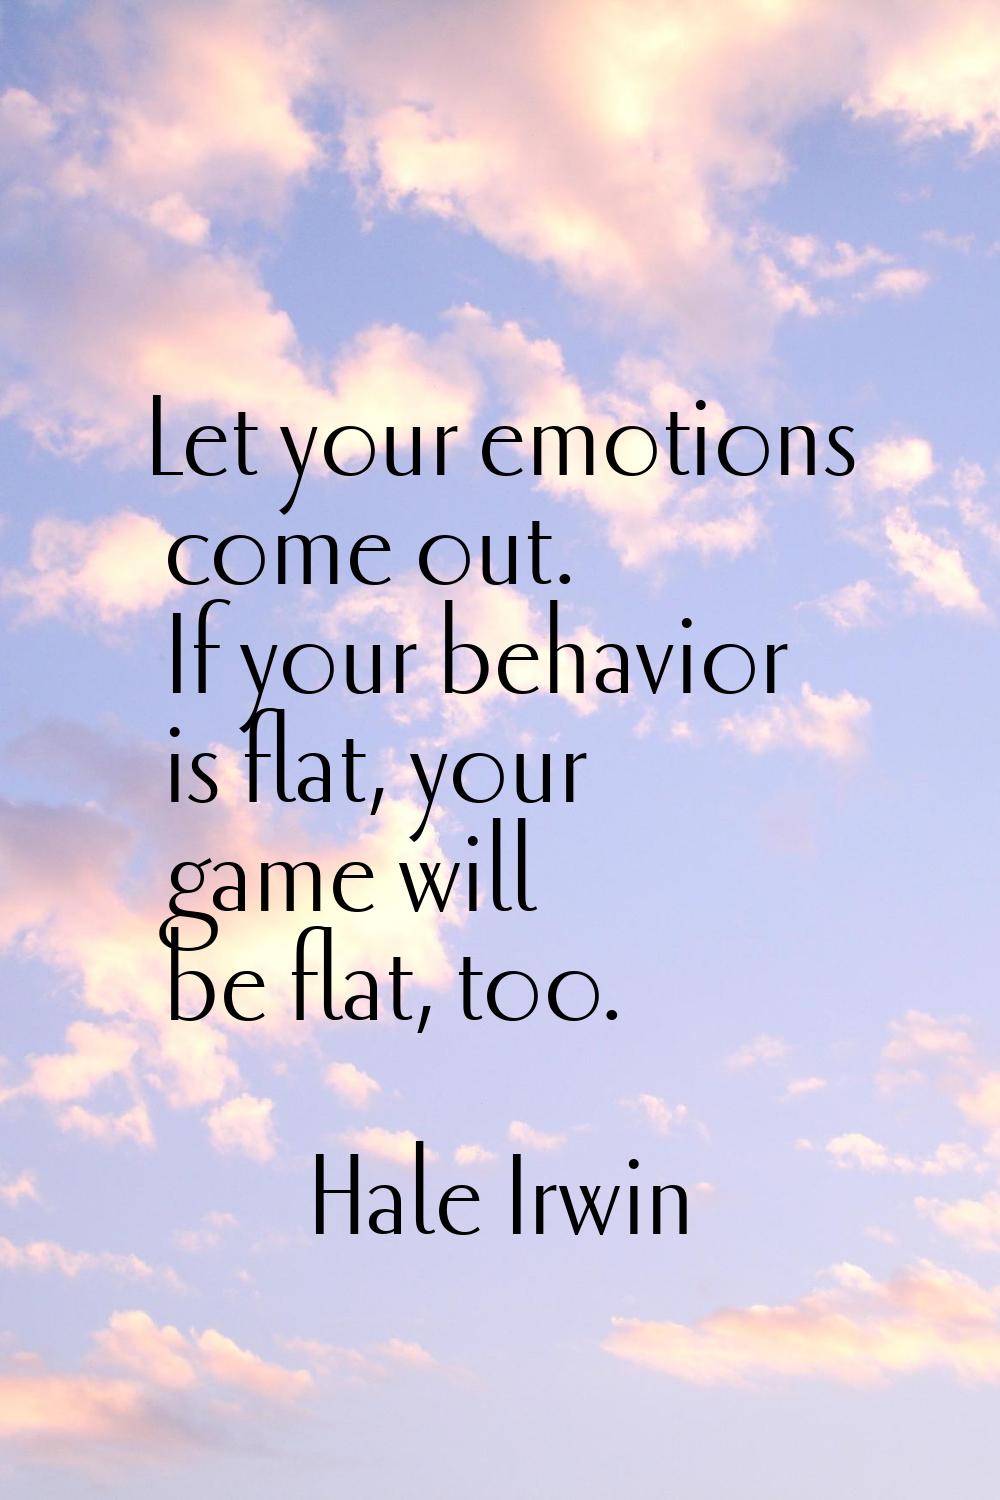 Let your emotions come out. If your behavior is flat, your game will be flat, too.